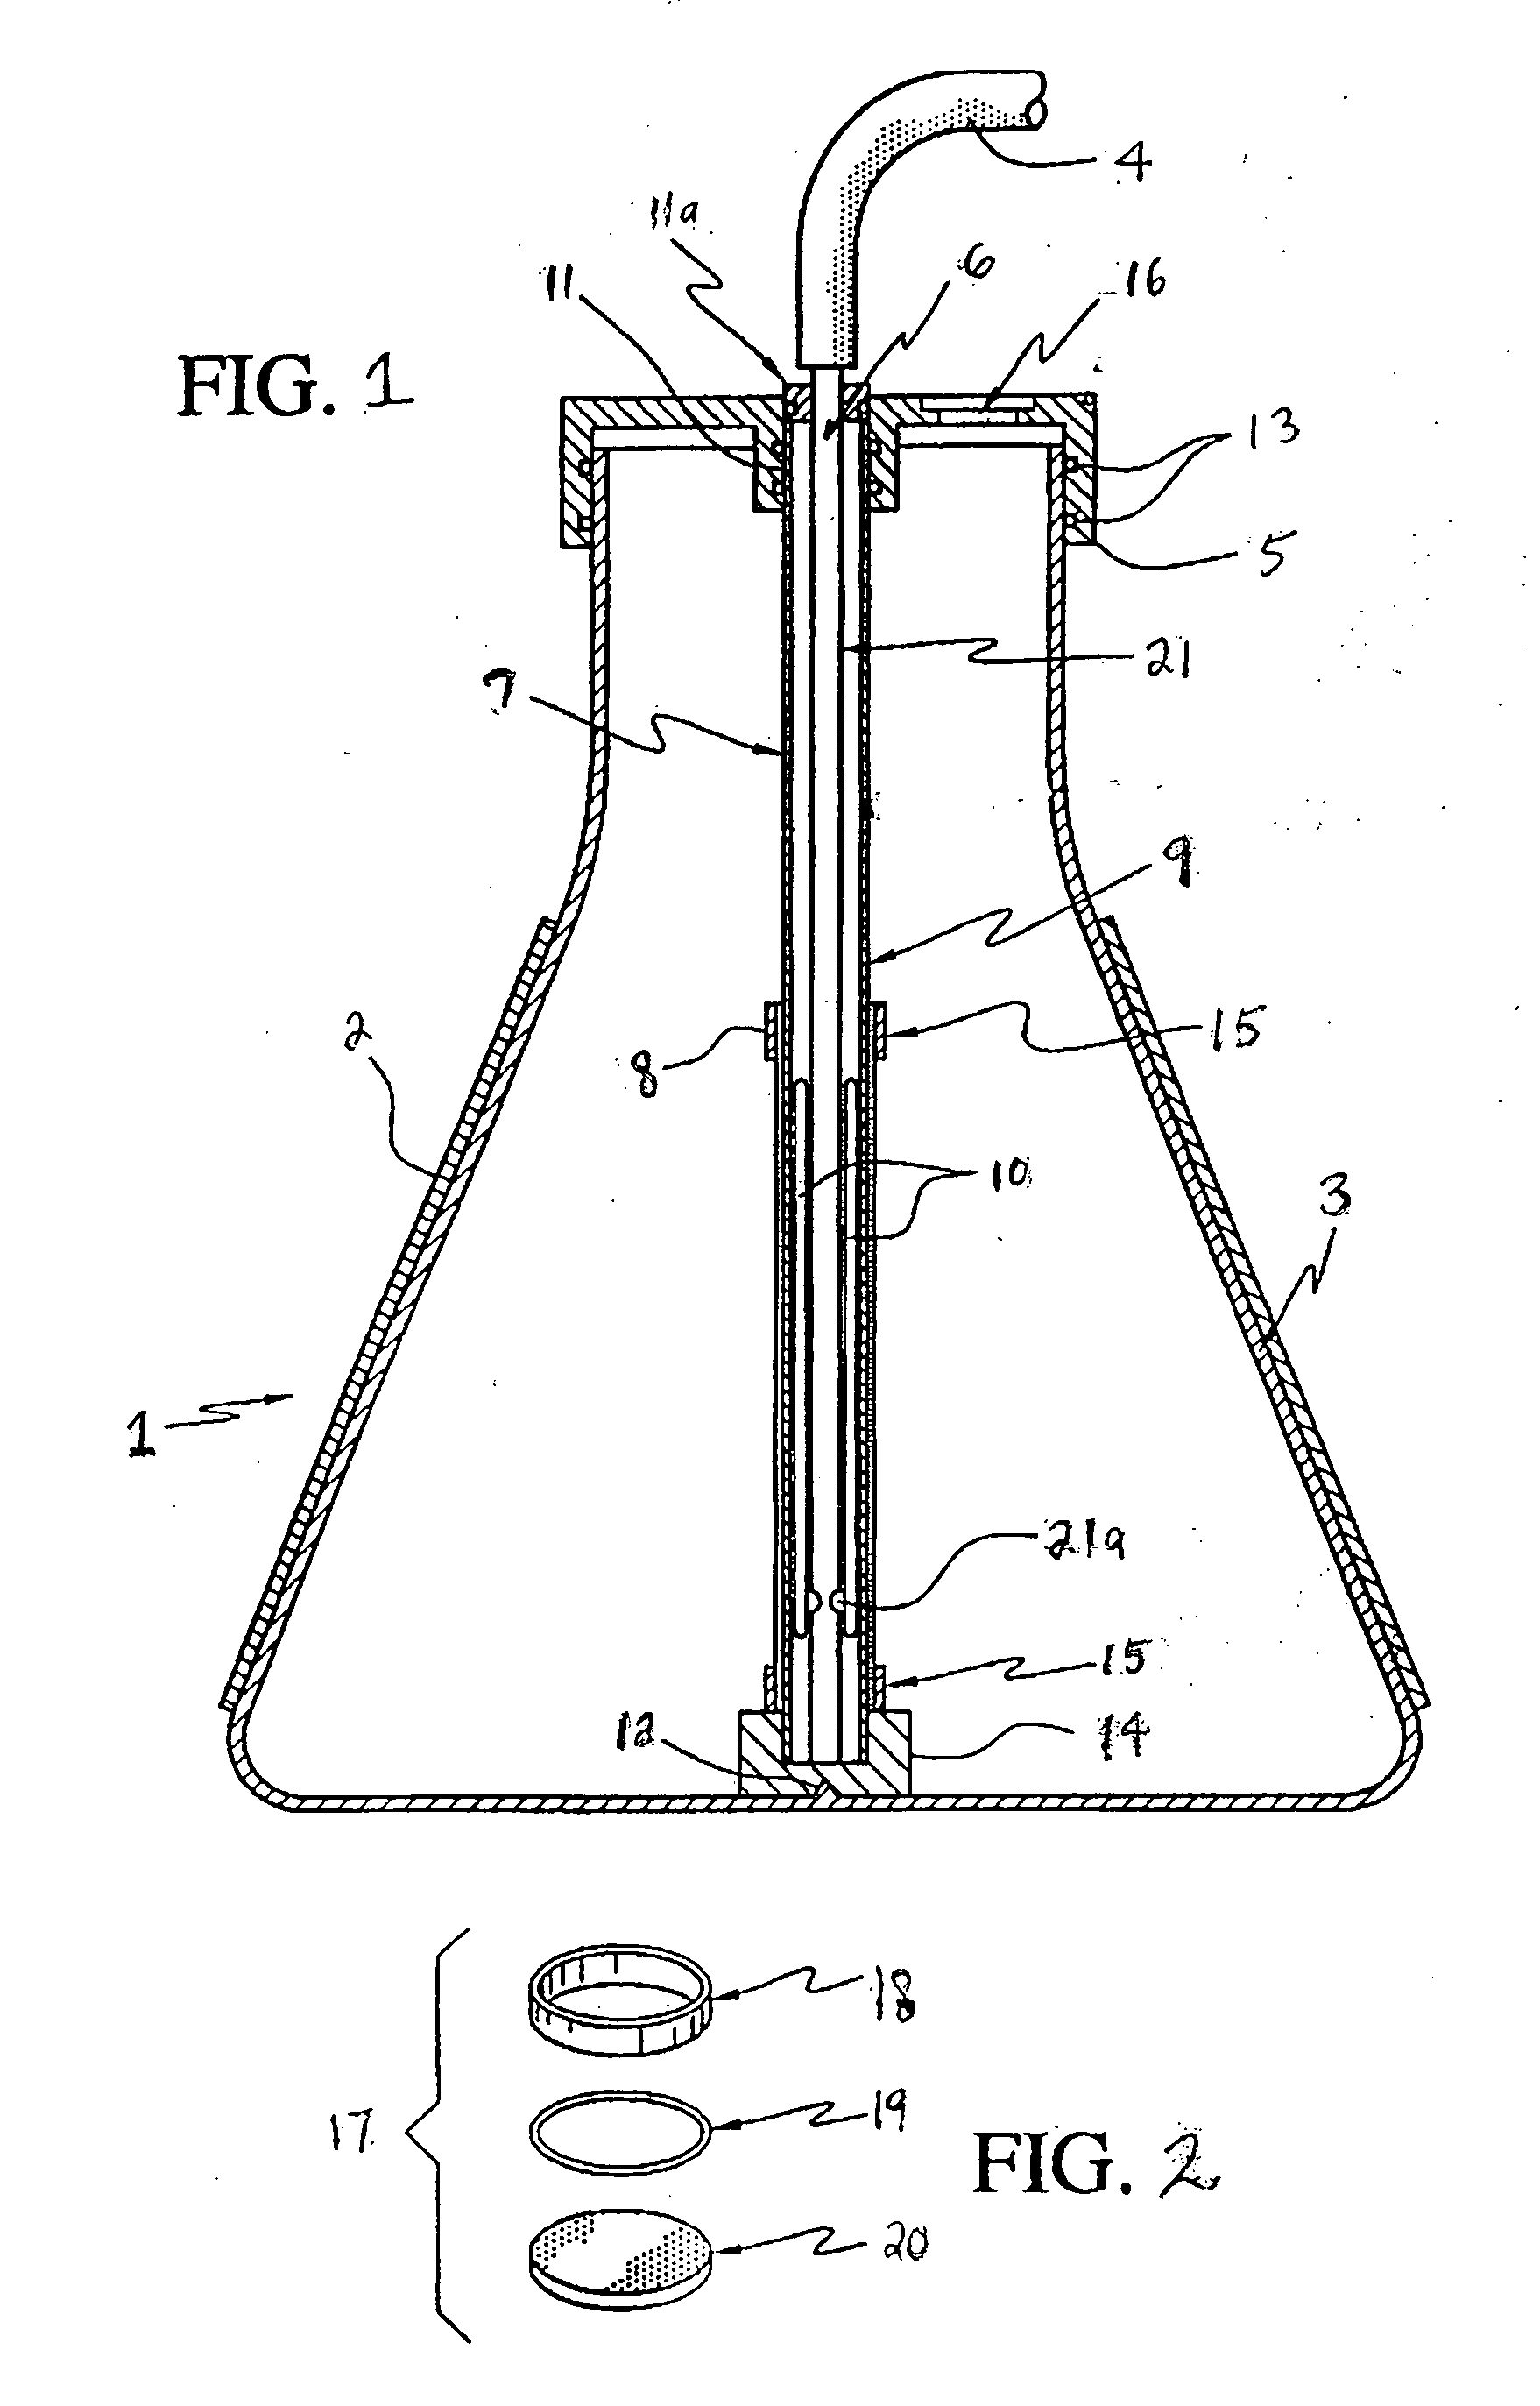 Apparatus for demineralizing osteoinductive bone